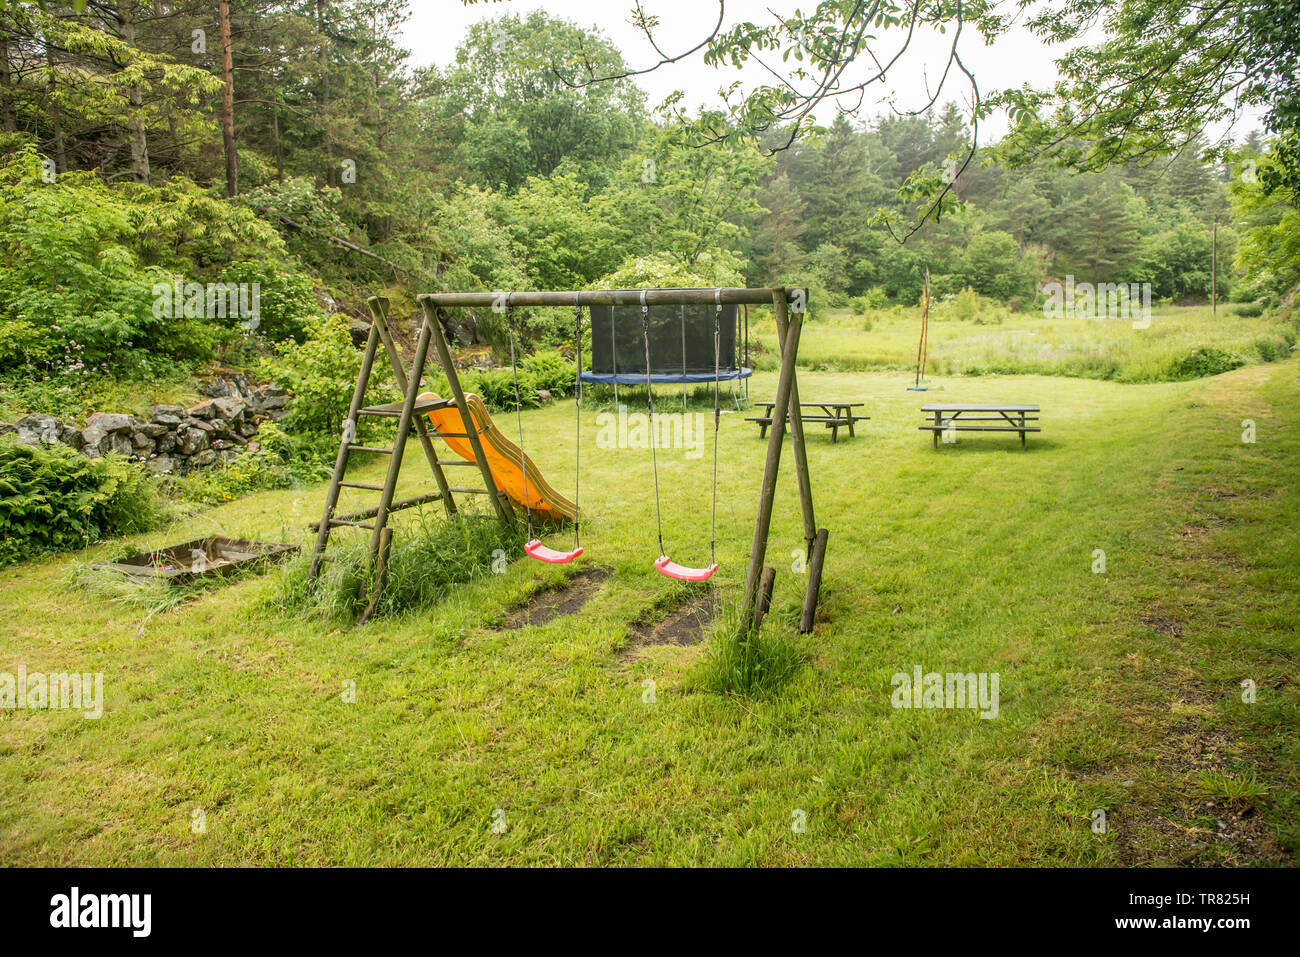 A small playground with swings, benches and a trampoline. Stock Photo